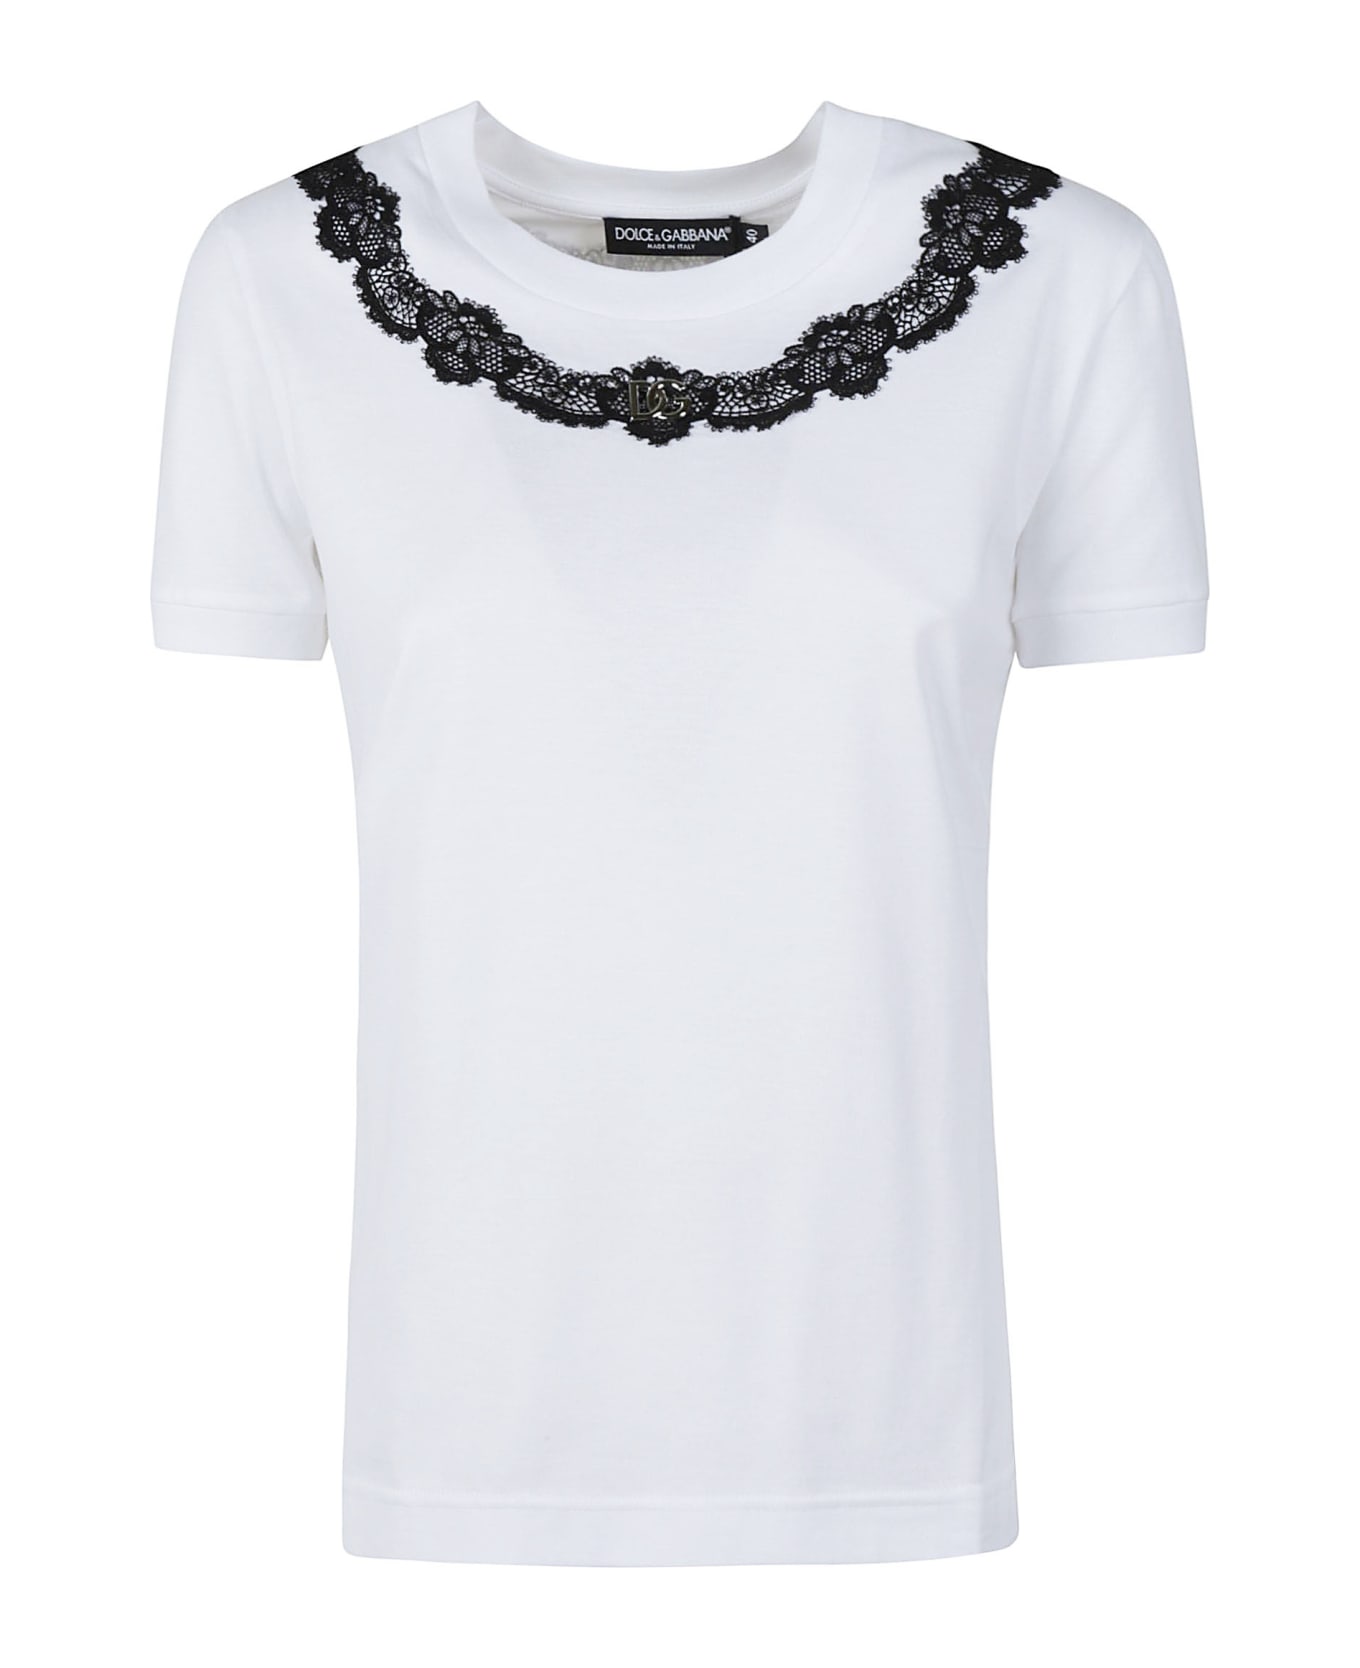 Dolce & Gabbana Embroidery Detail T-shirt - White